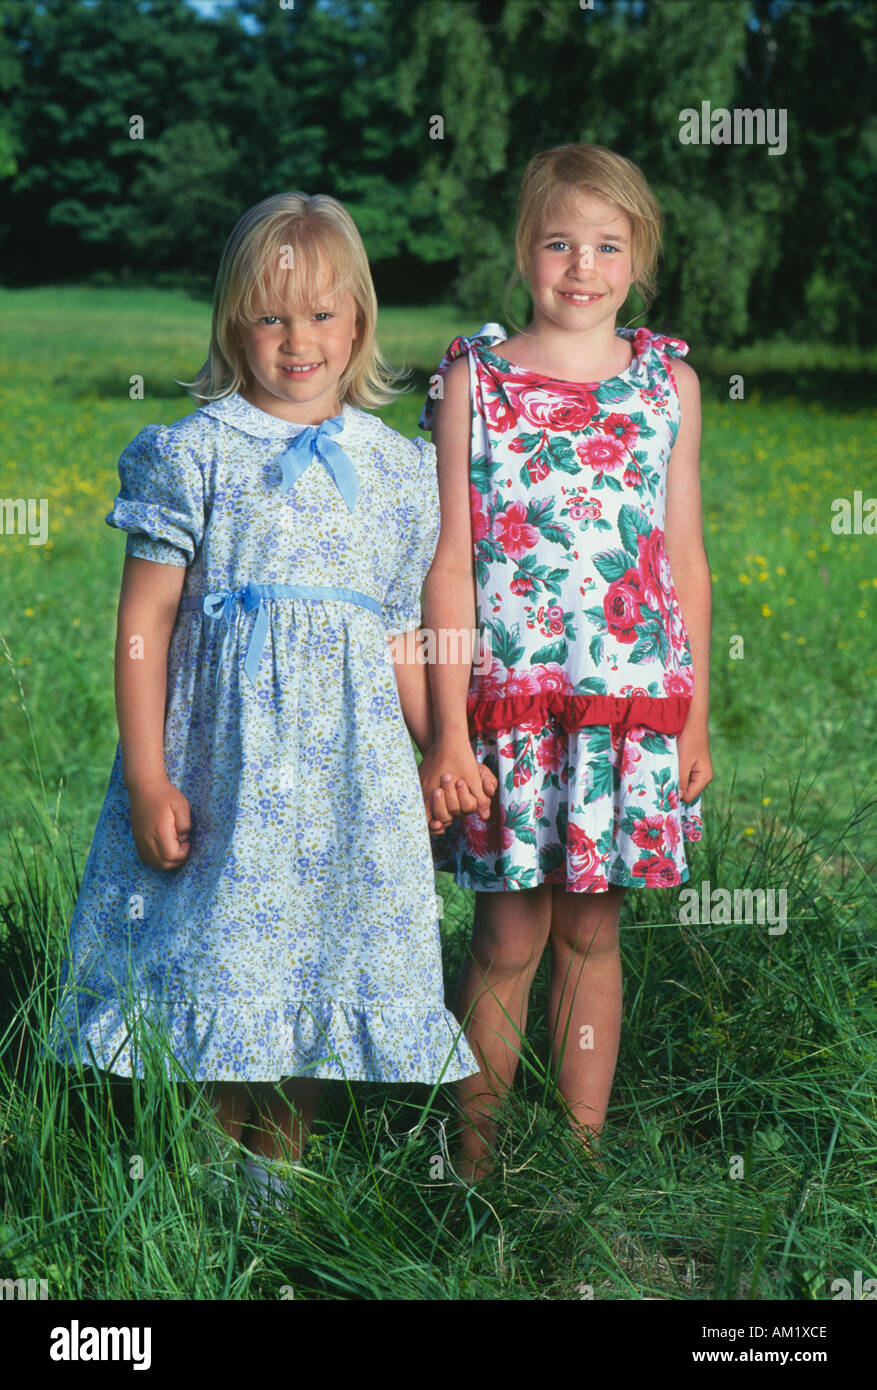 Two young Swedish girls wearing dresses posing for camera Stock Photo